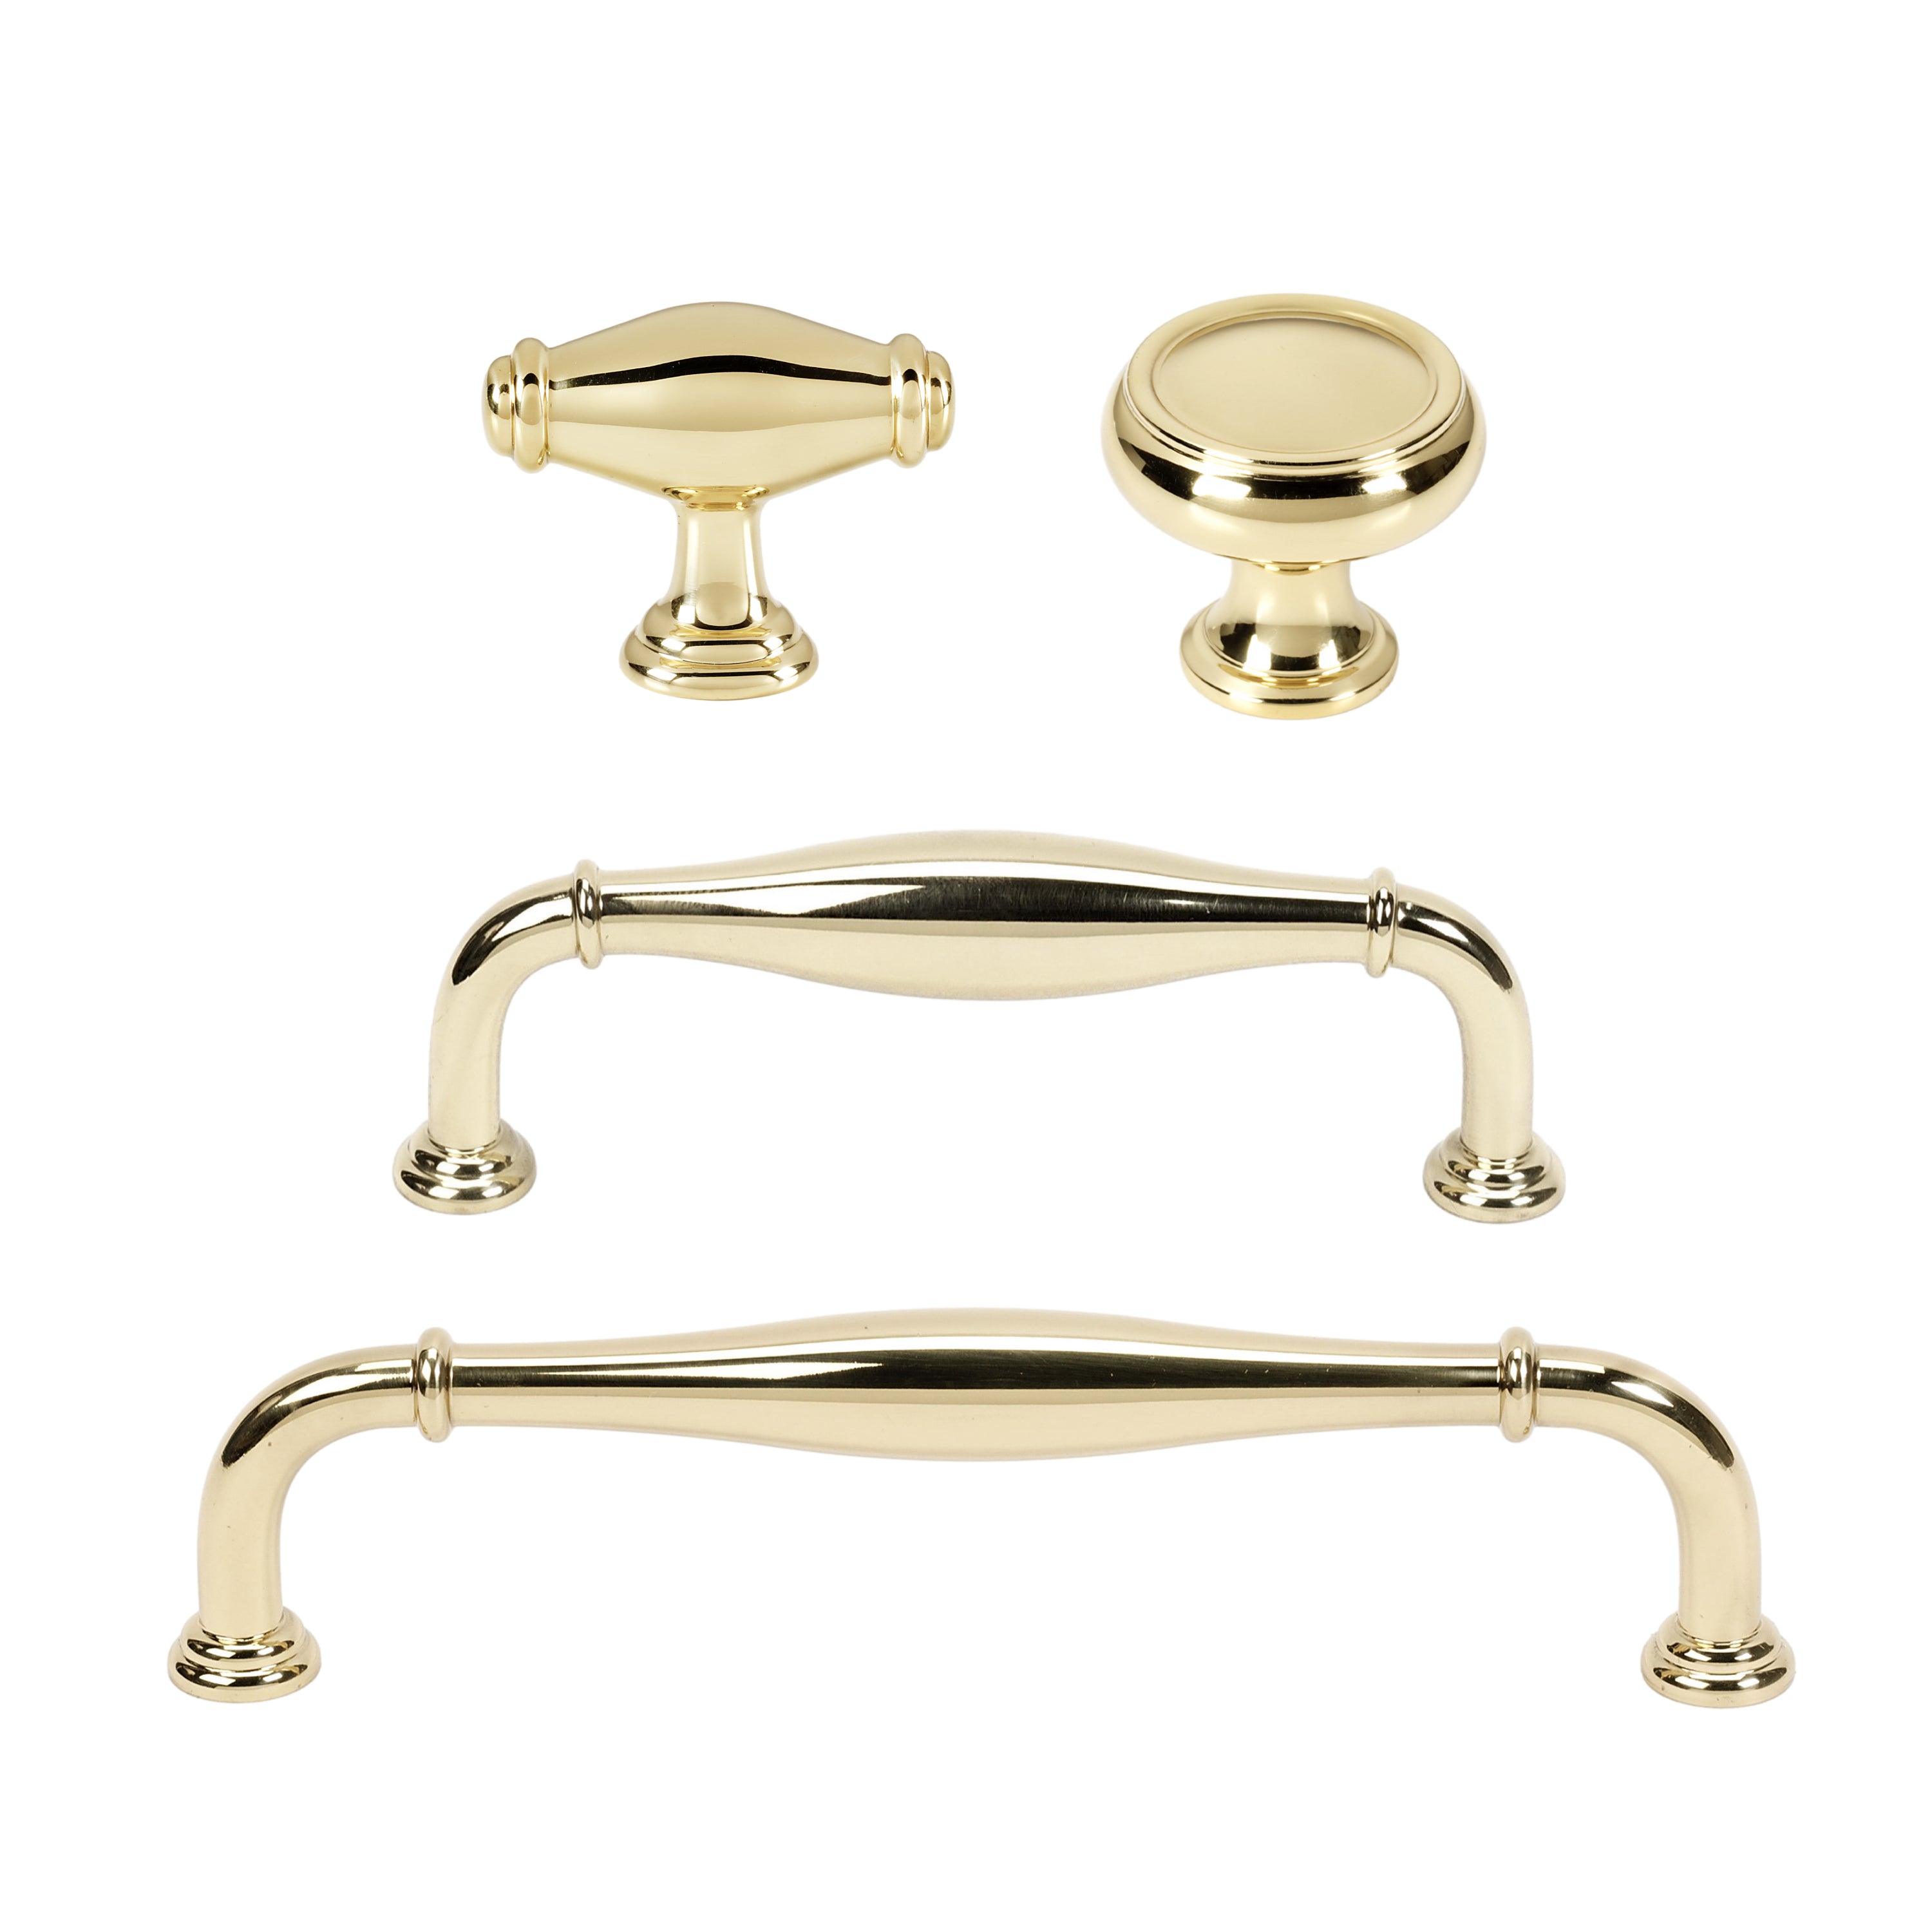 Unlacquered Brass "Perry" Cabinet Knobs and Drawer Pulls - Industry Hardware